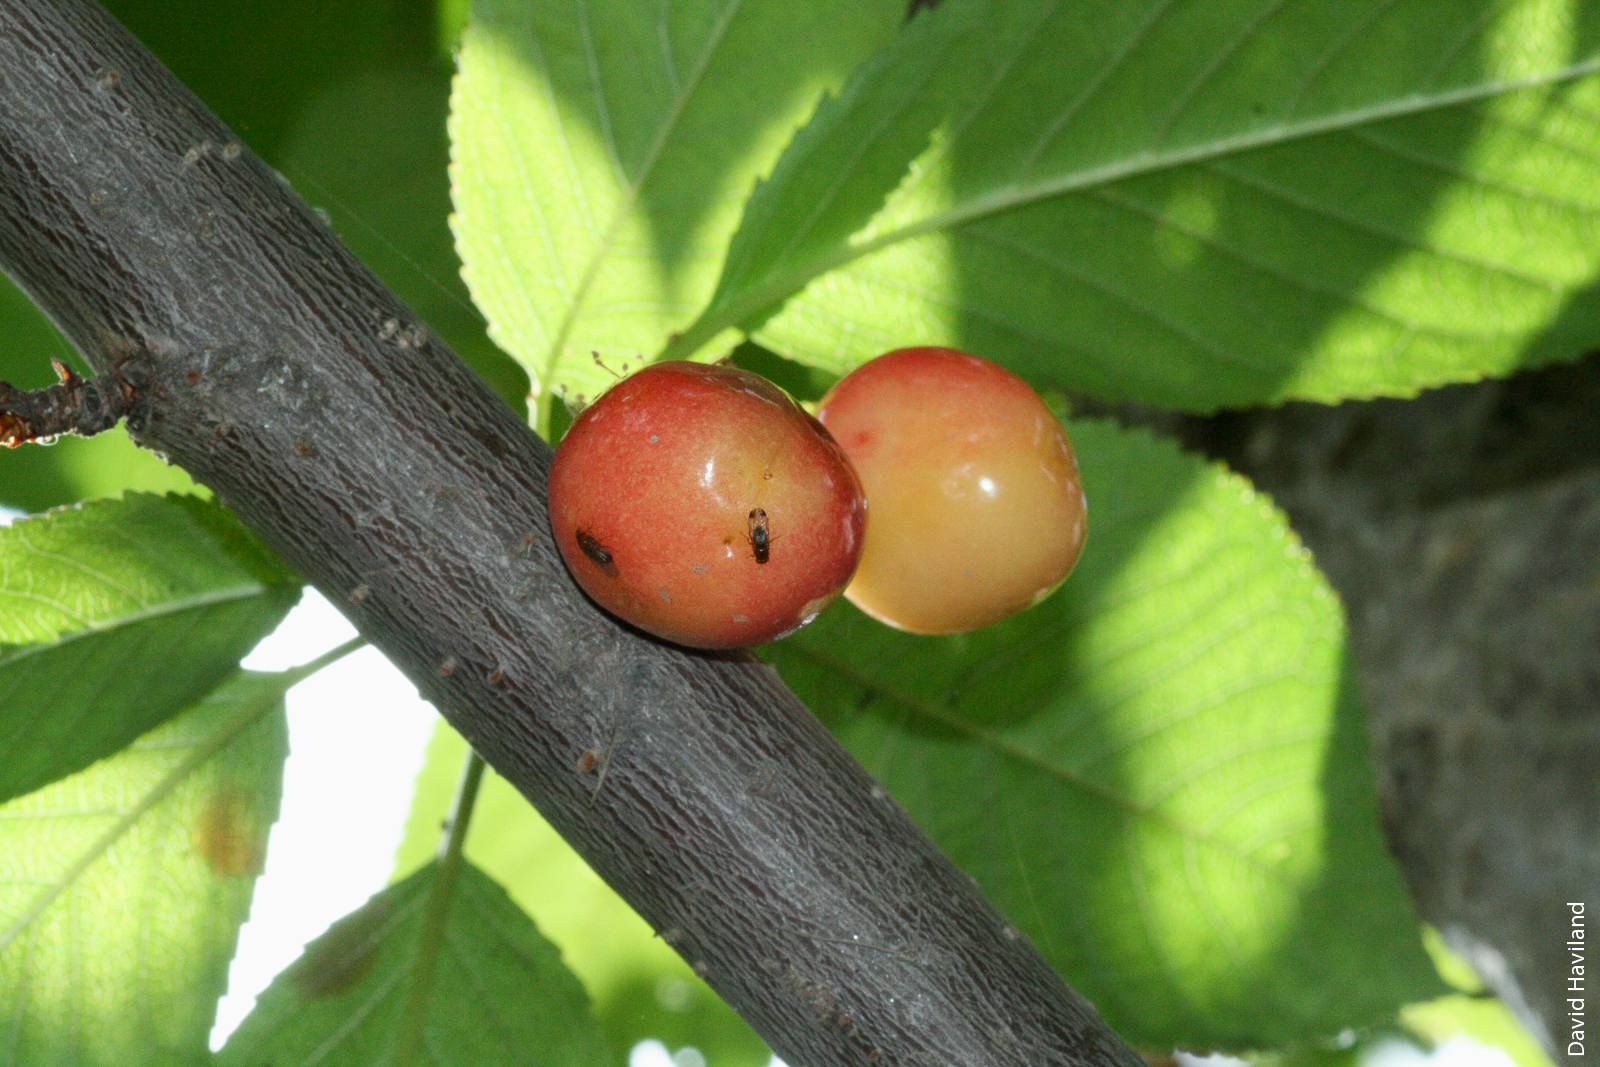 Spotted wing drosophila lay eggs on cherries before the fruit is ready to harvest.